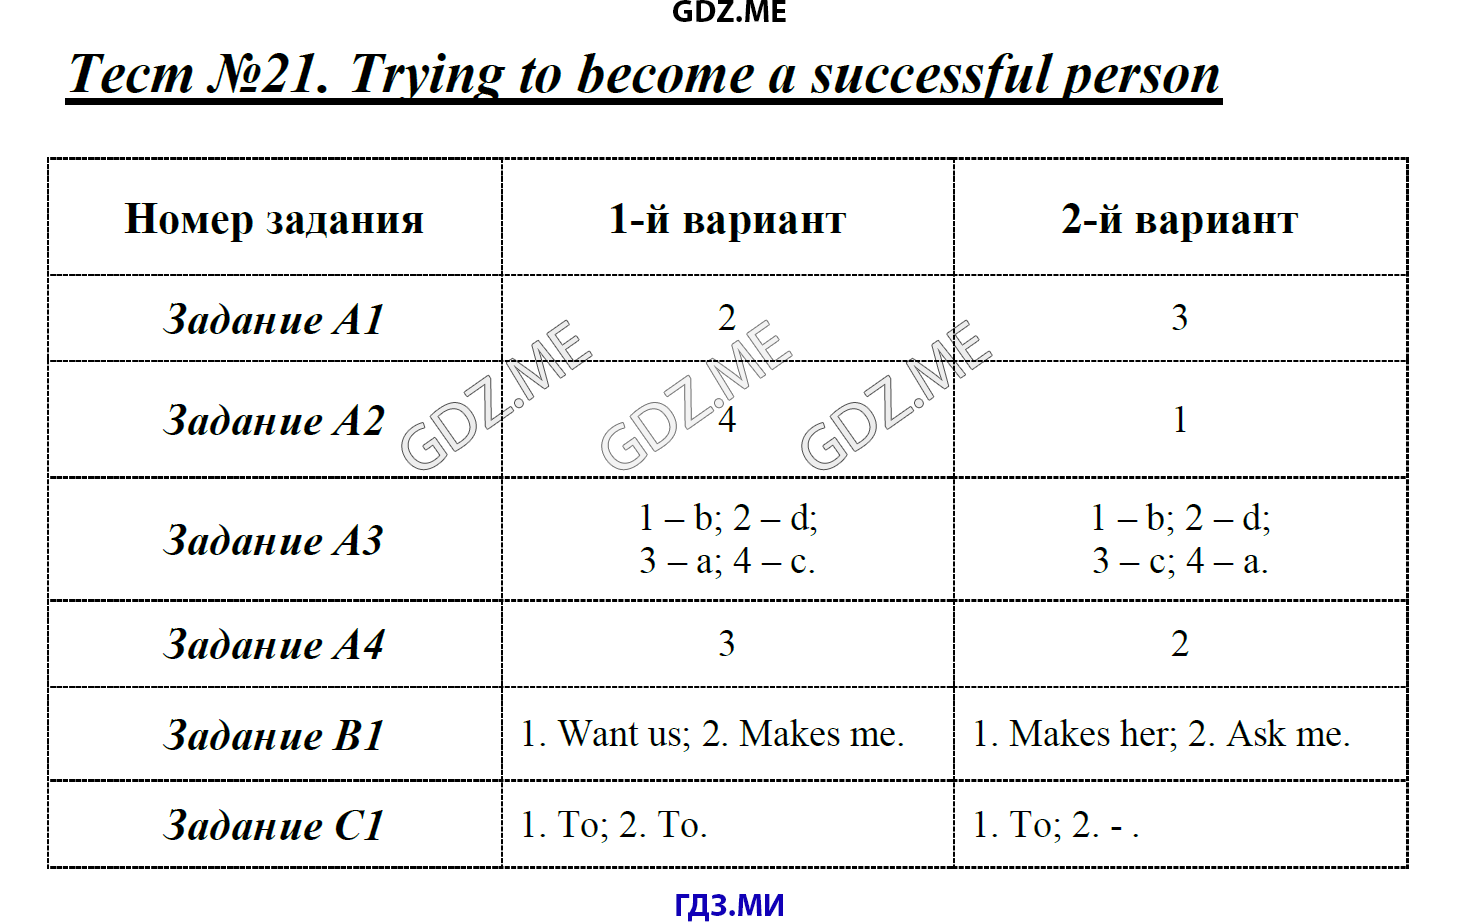 Тест номер 21. 4 Trying to become a successful person Section 1 ответы. Test 20 trying to become a successful person variant 1 ответы.